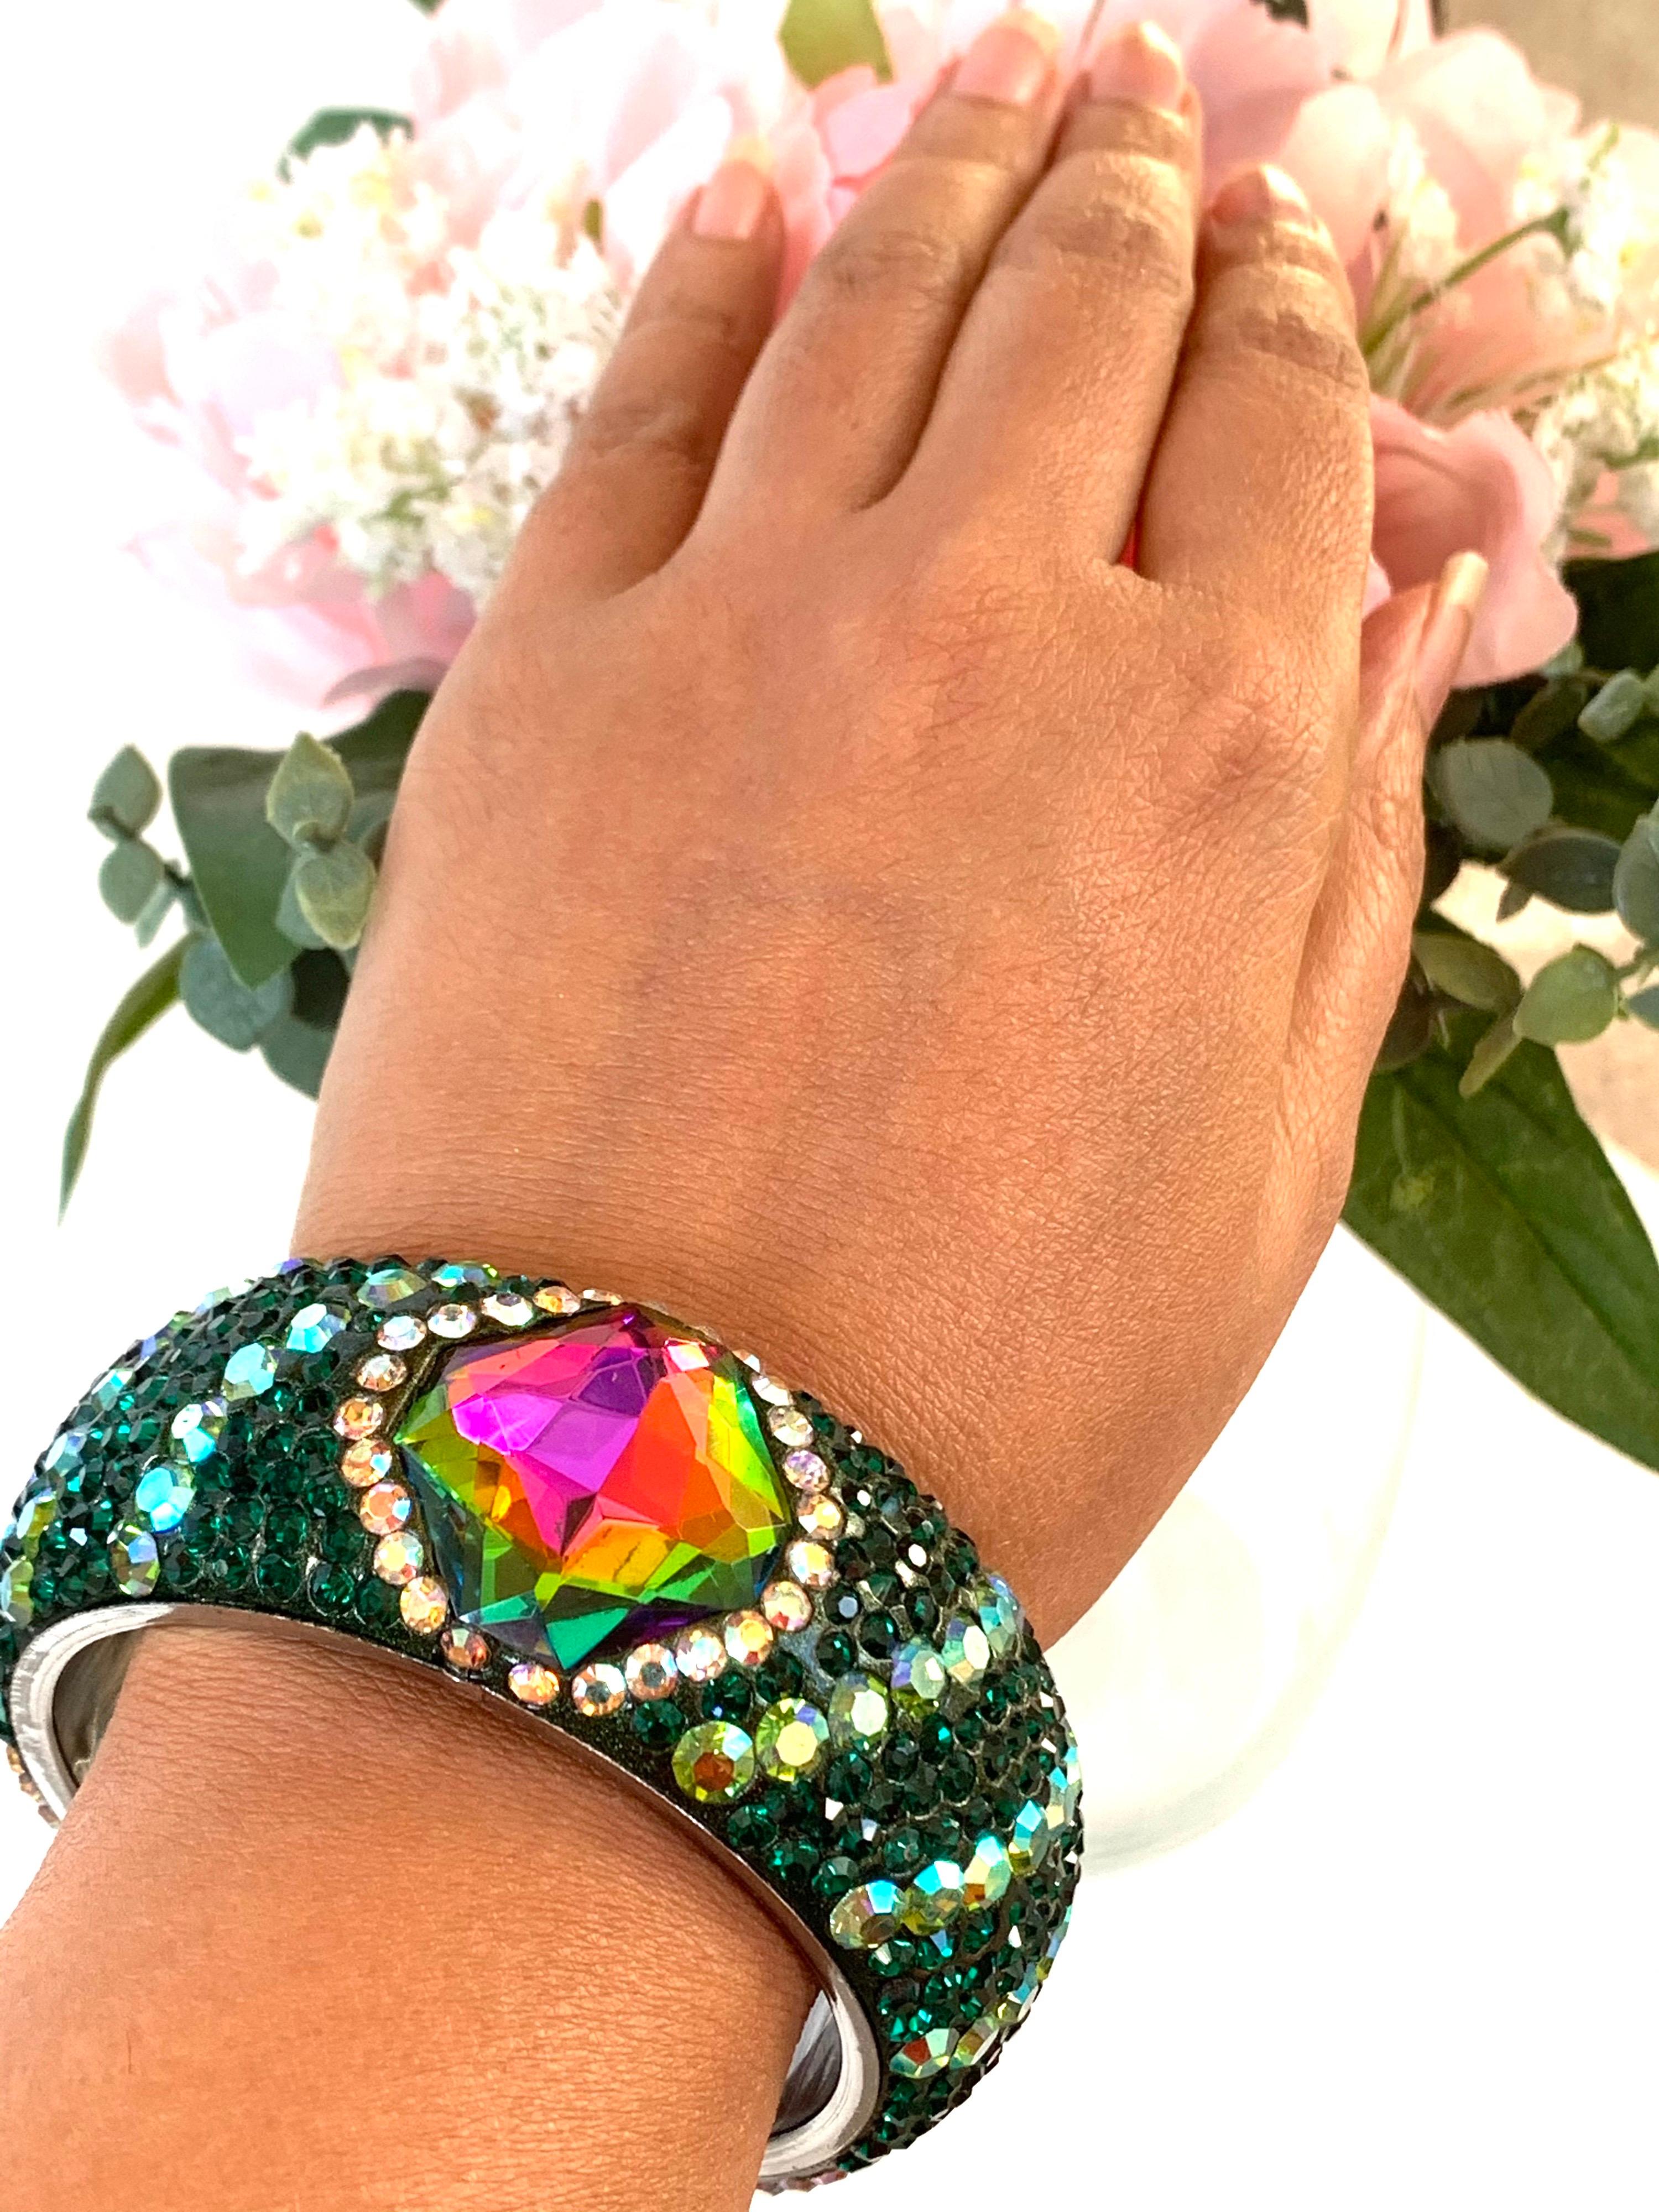 Stunning Slip On bracelet embellished with bright color emerald green and multi color rhinestones.  Only 1 available.
Inner diameter 65.00 mm (2.56 in), inner circumference 204.2 mm (7.04 in)

FOLLOW  MEGHNA JEWELS storefront to view the latest